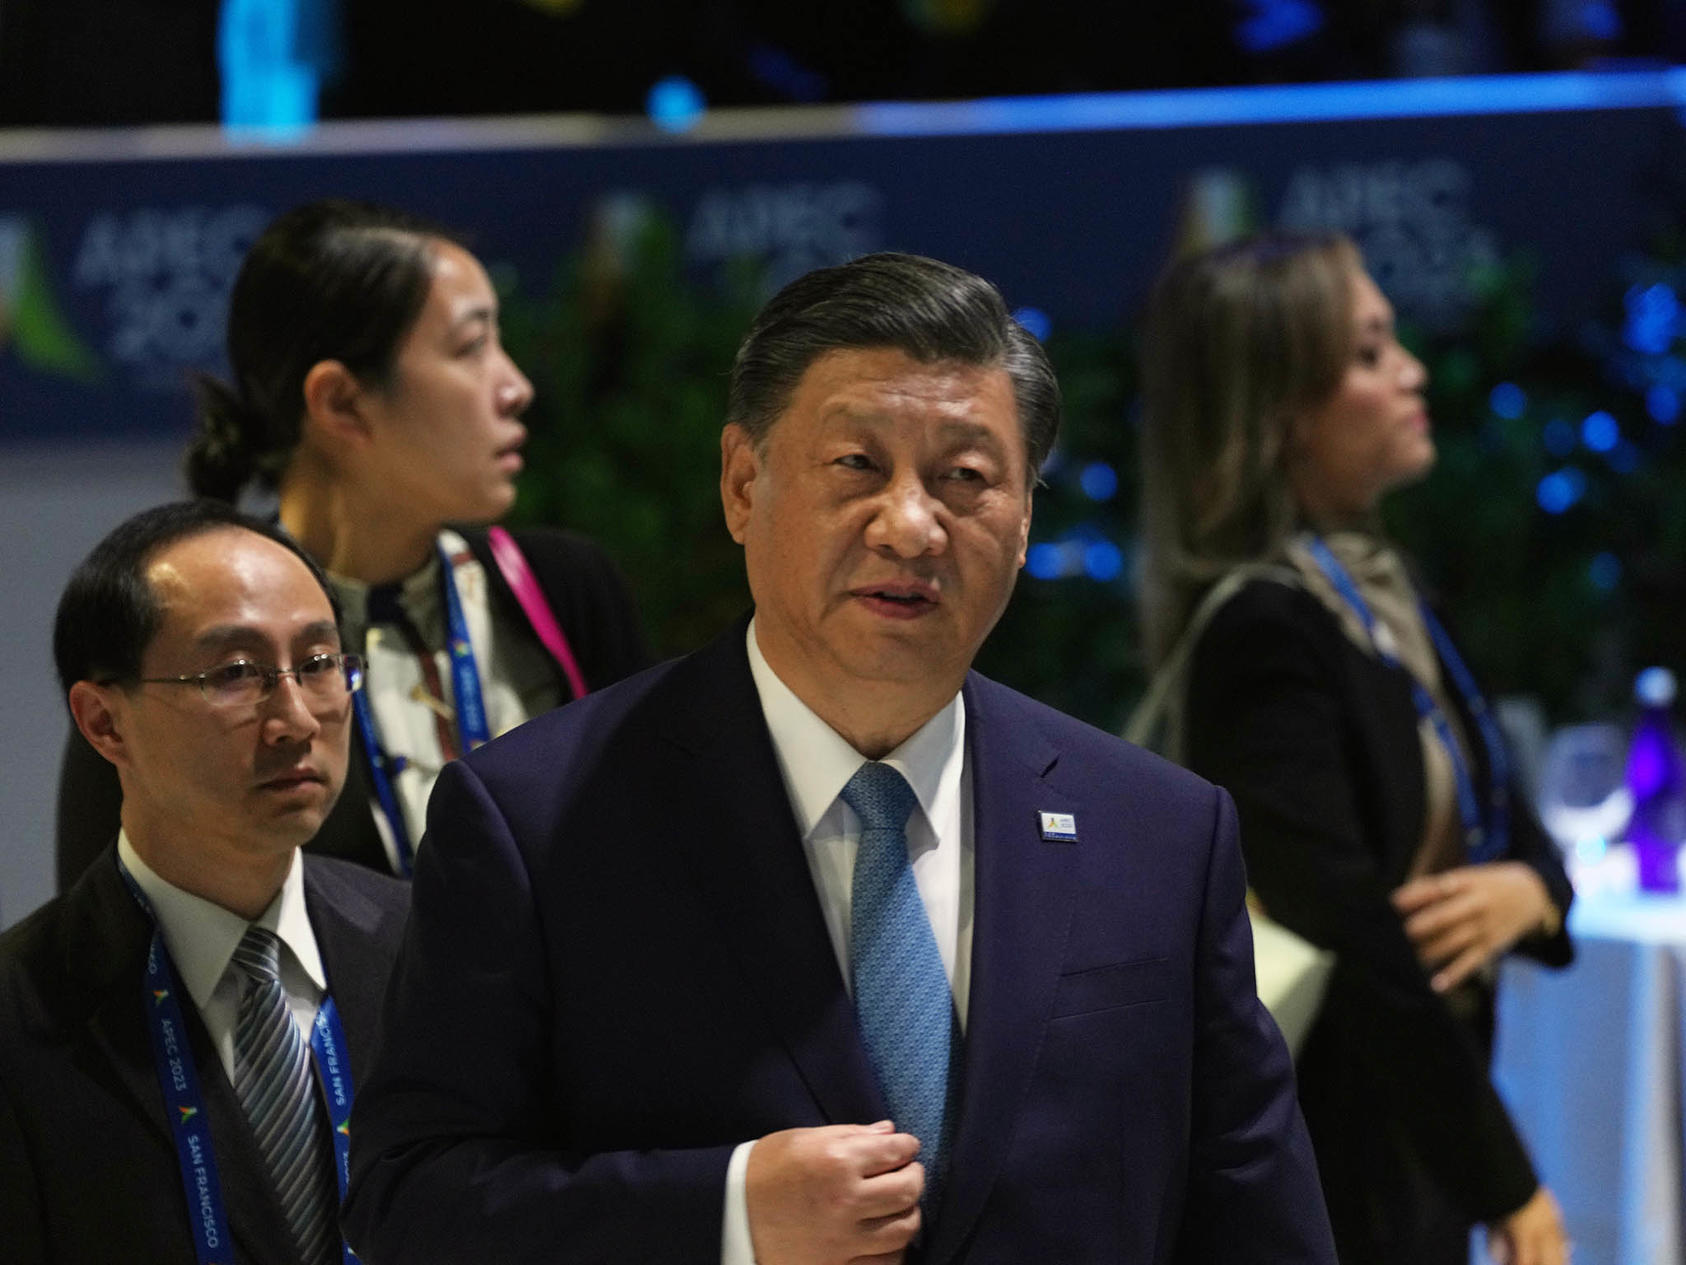 Chinese President Xi Jinping arrives for the final session of the Asia-Pacific Economic Cooperation summit in San Francisco on November 17, 2023. (Jim Wilson/The New York Times)